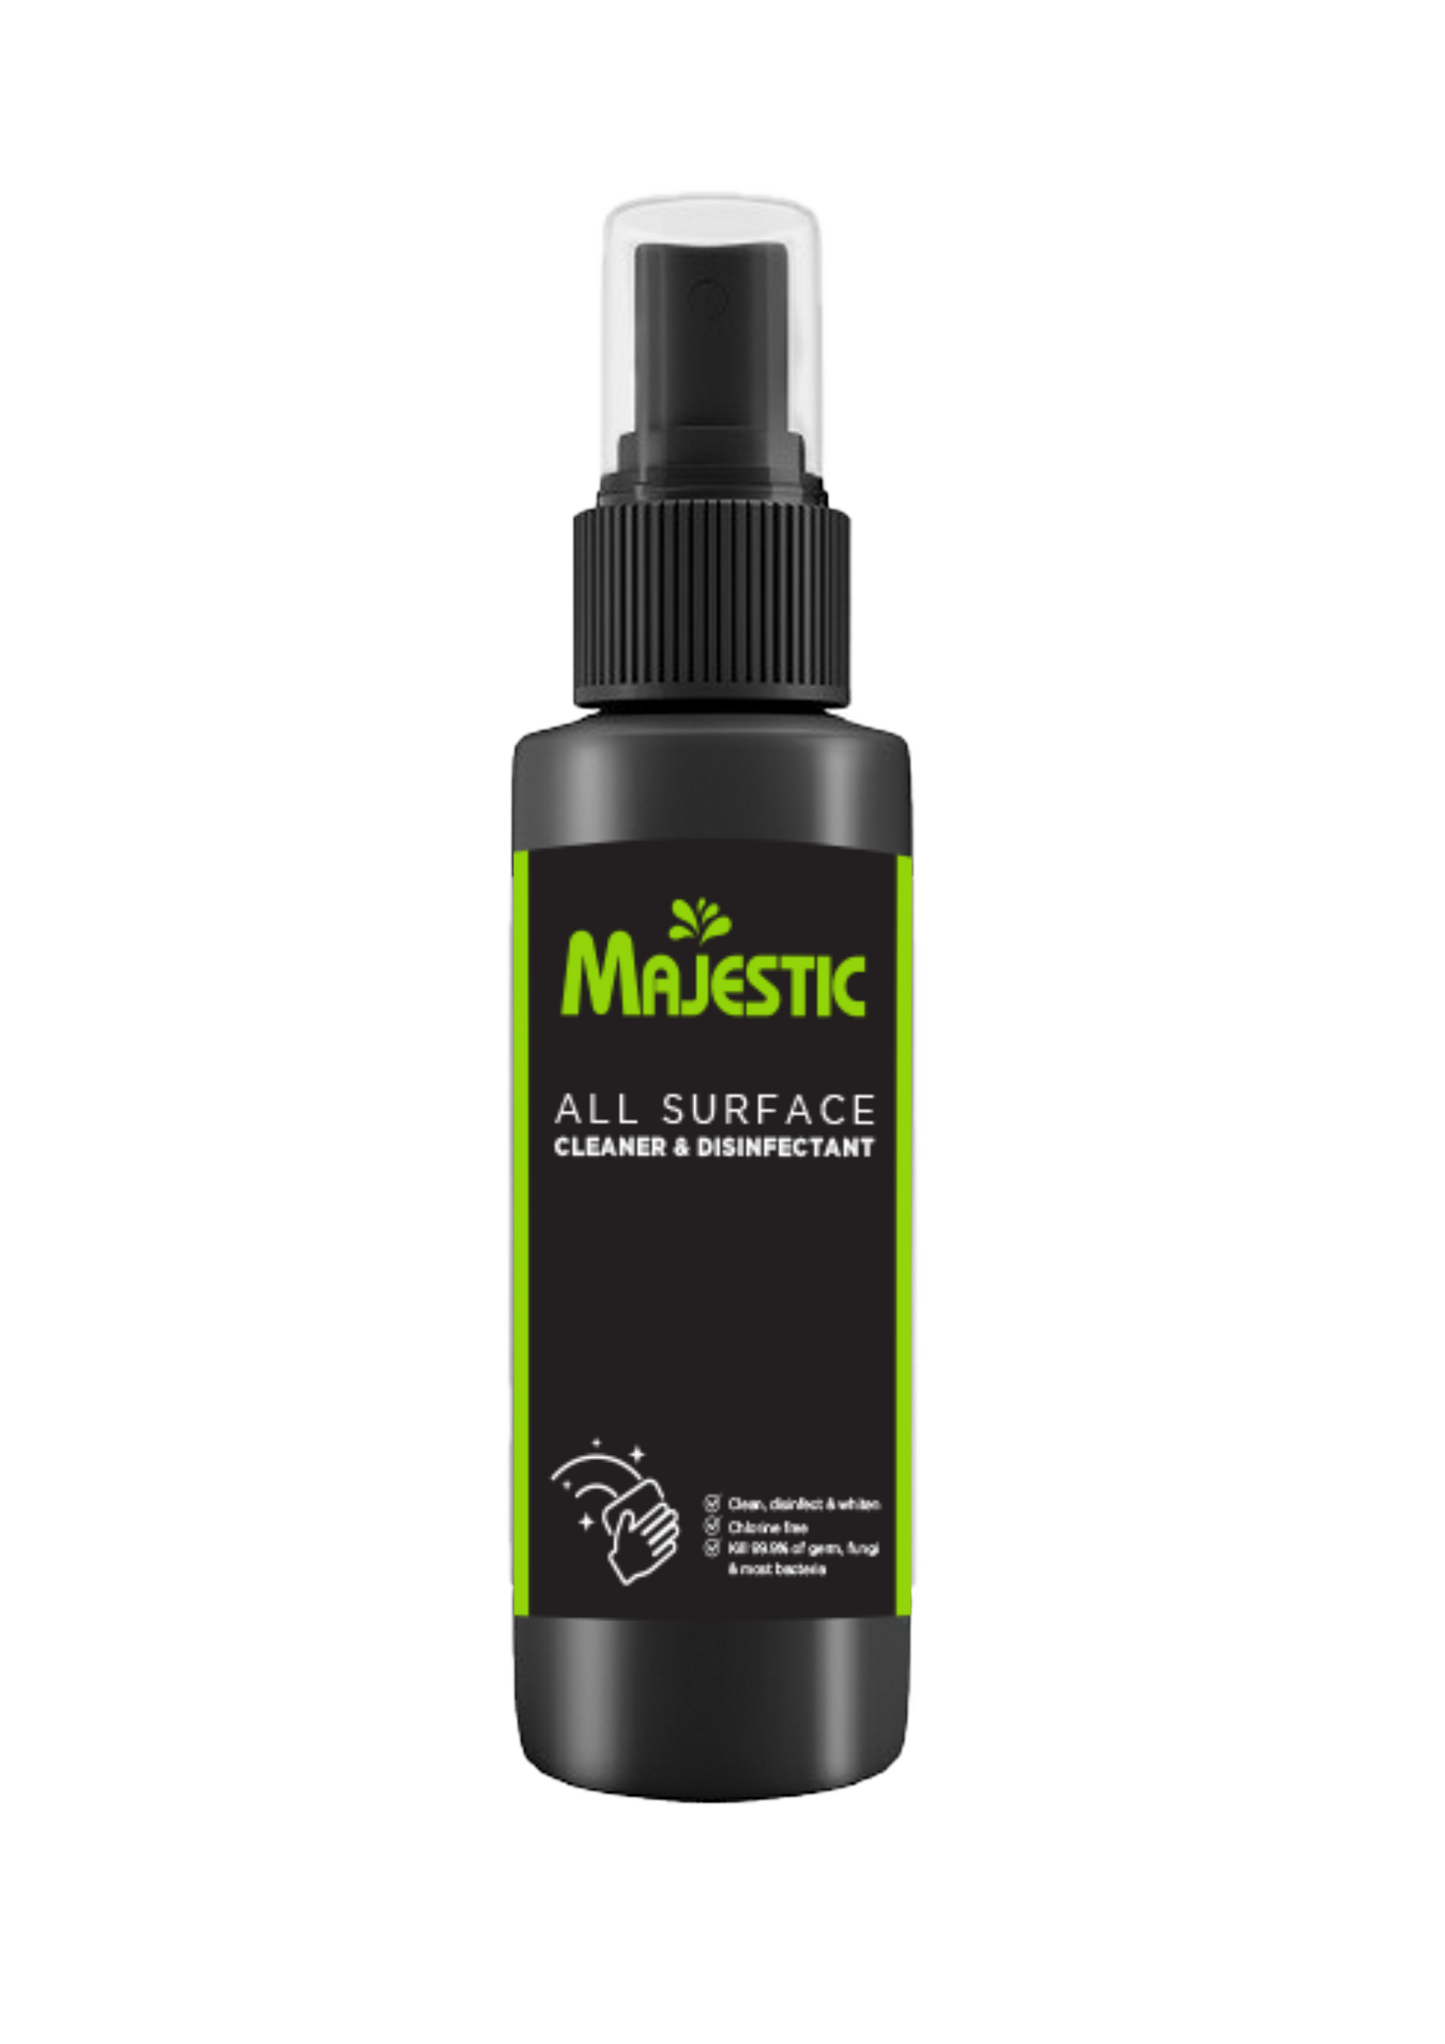 Majestic All Surface Cleaner & Disinfectant